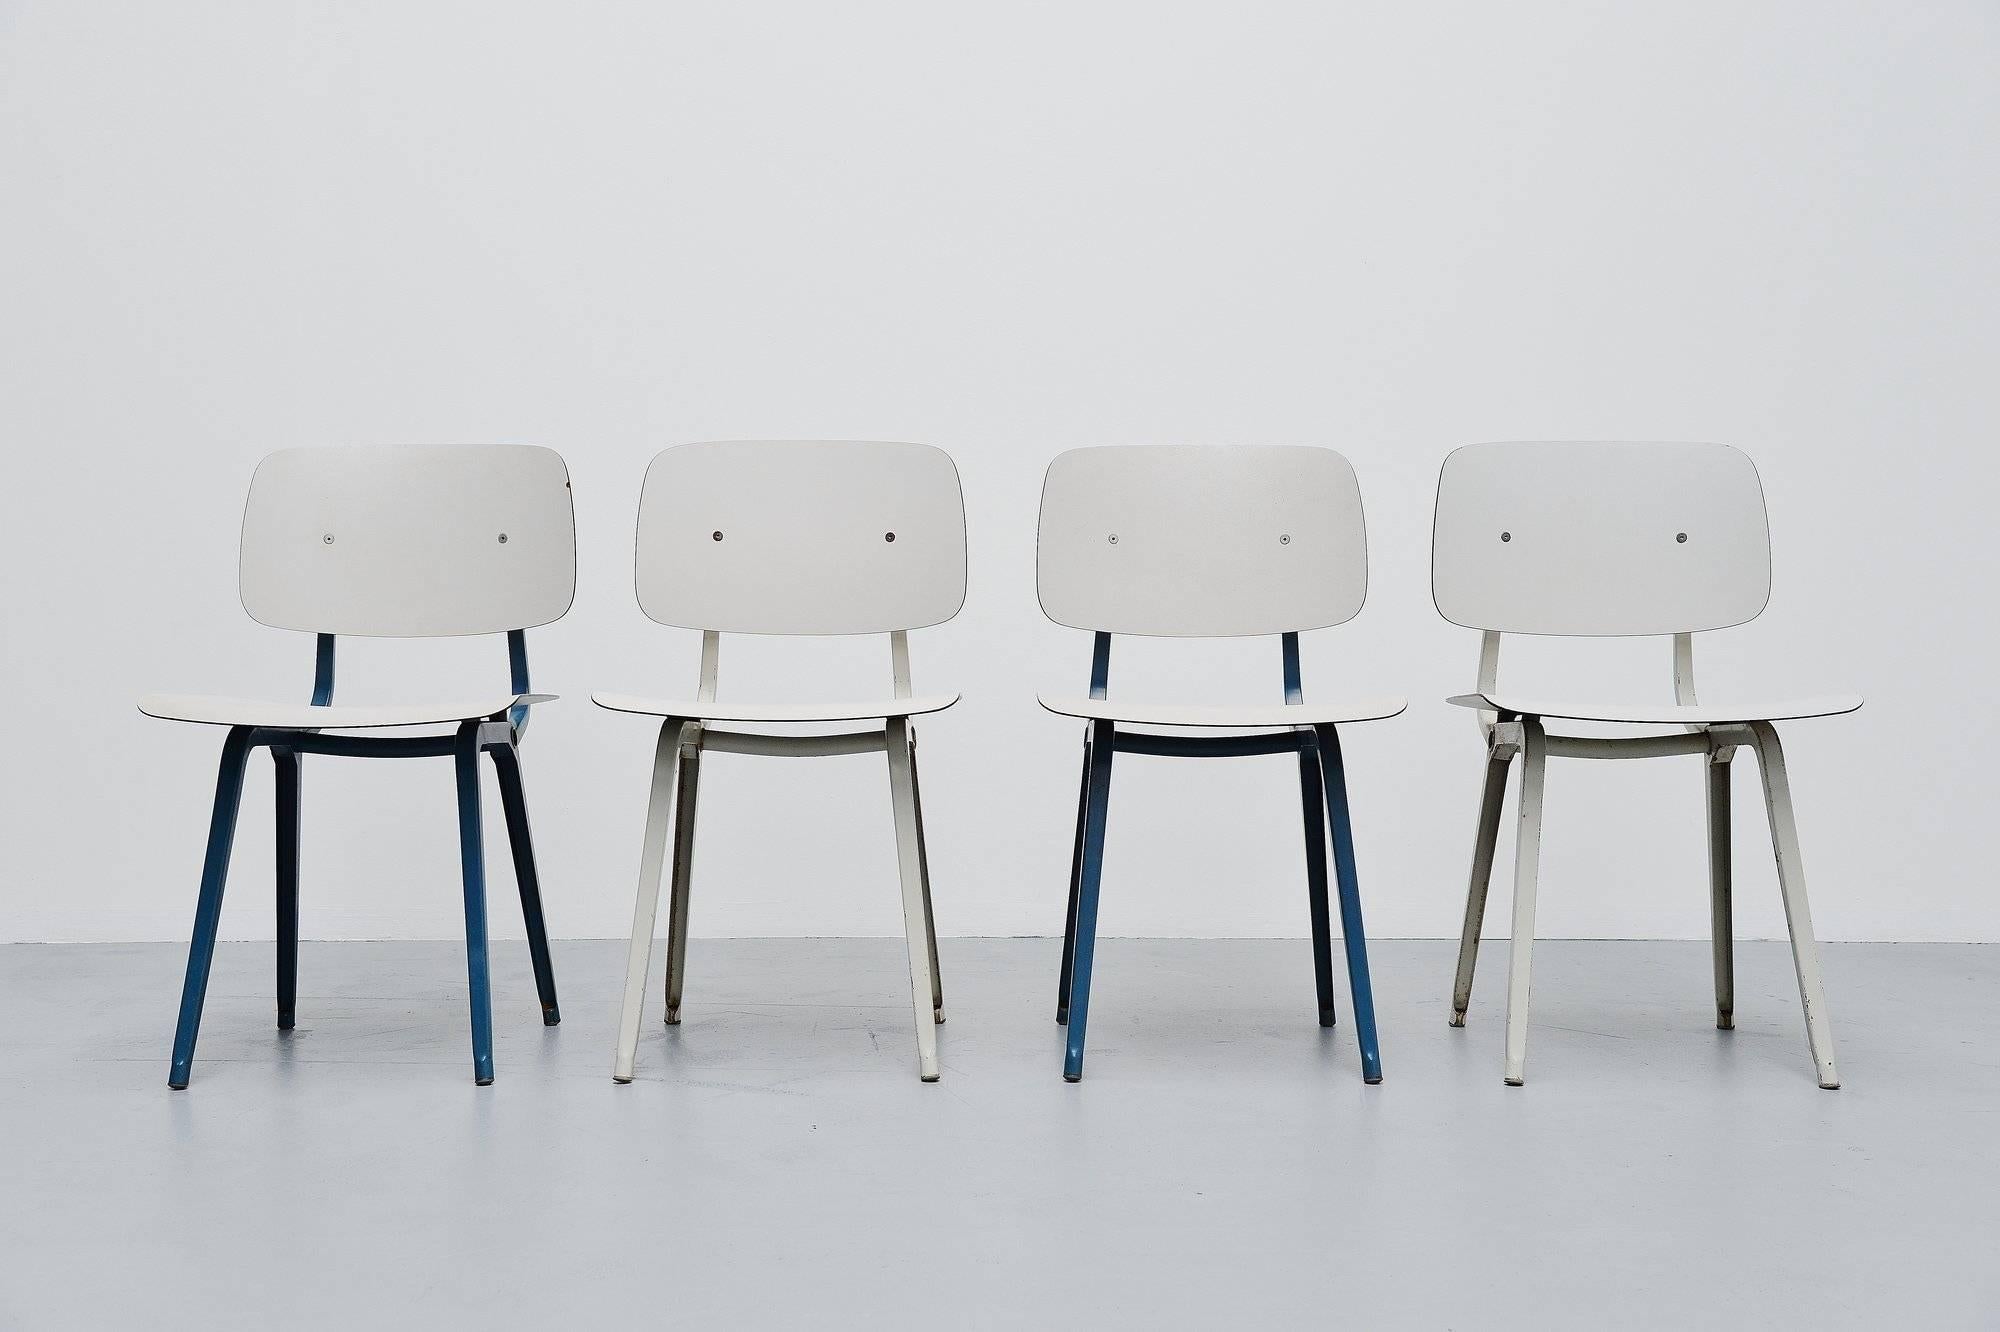 Nice set of four Revolt chairs designed by Friso Kramer for Ahrend de Cirkel, Holland 1953. Though the Revolt chair was already designed in 1953, the production started in 1958. The chairs have a folded metal base which is very strong and a ciranol